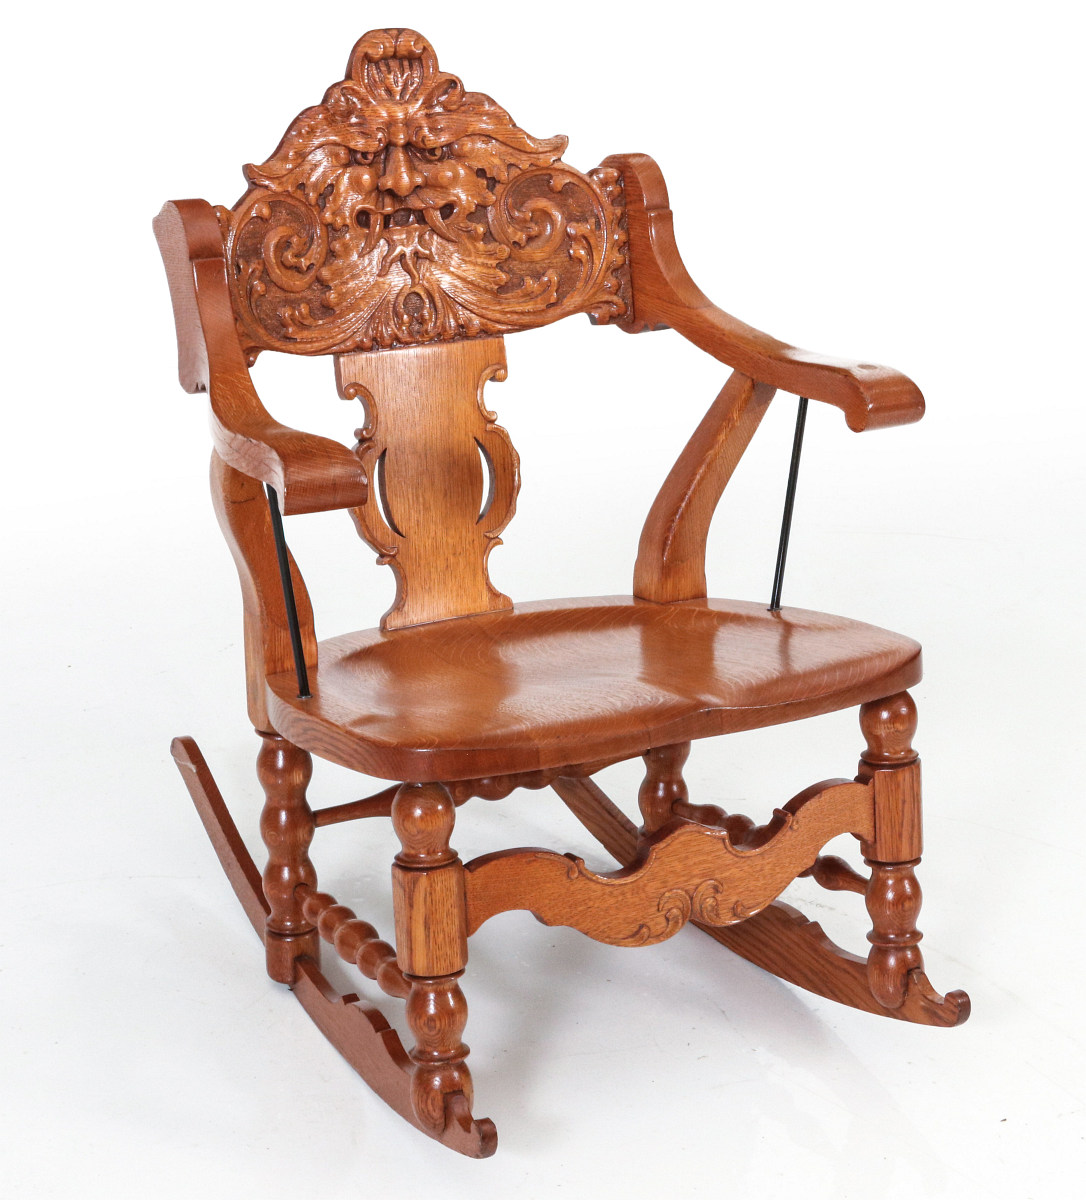 A HEAVILY CARVED LATE 19TH C. AMERICAN ROCKING CHAIR